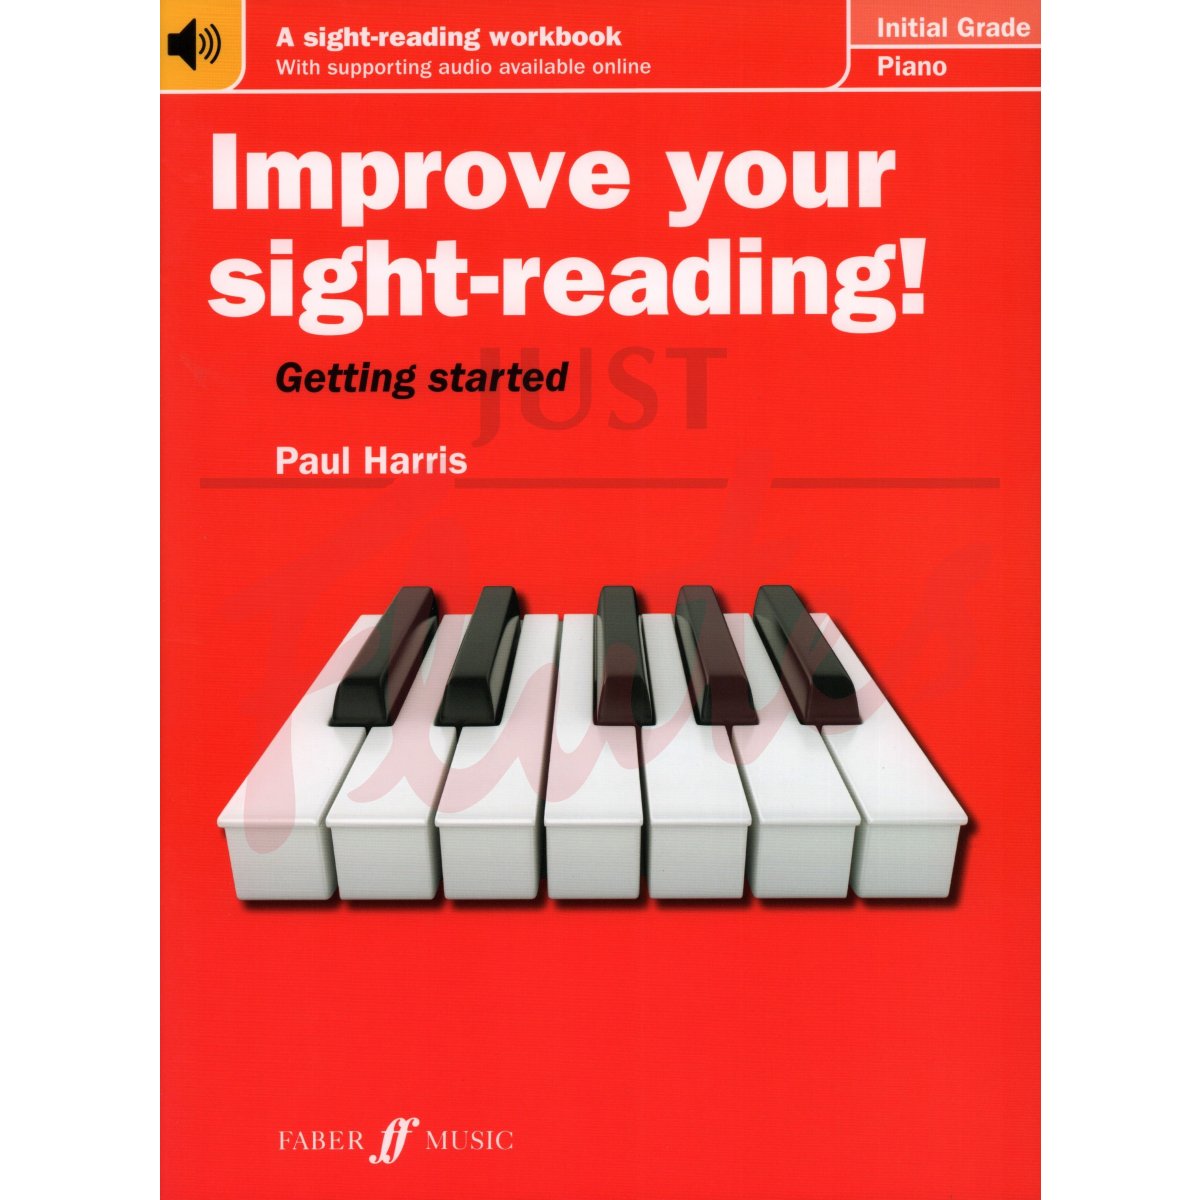 Improve Your Sight-Reading! [Piano] Initial